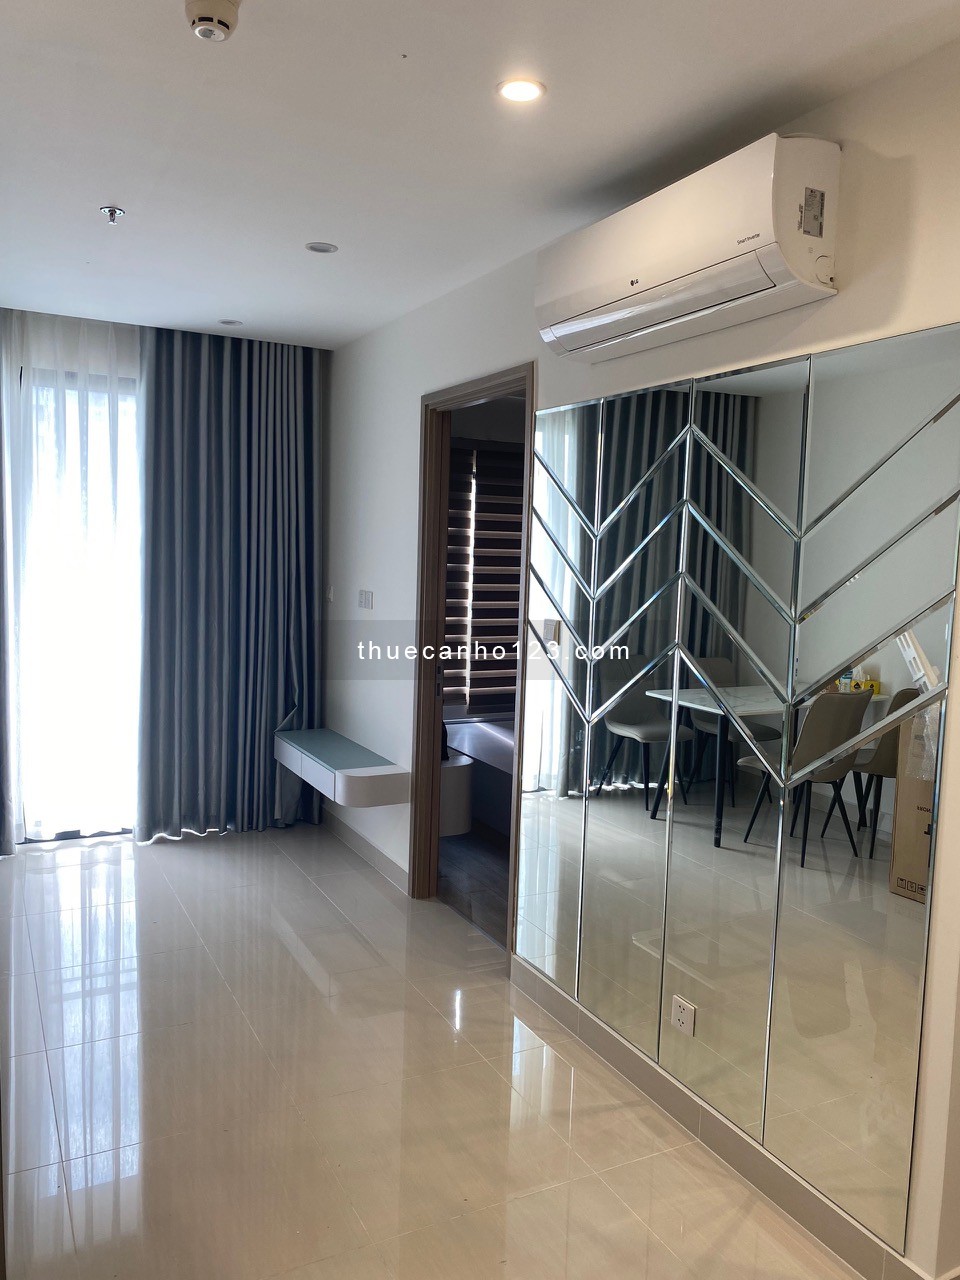 Vinhomes Grand Park Origami 60m2 2PN/2WC nội thất mới (English available)